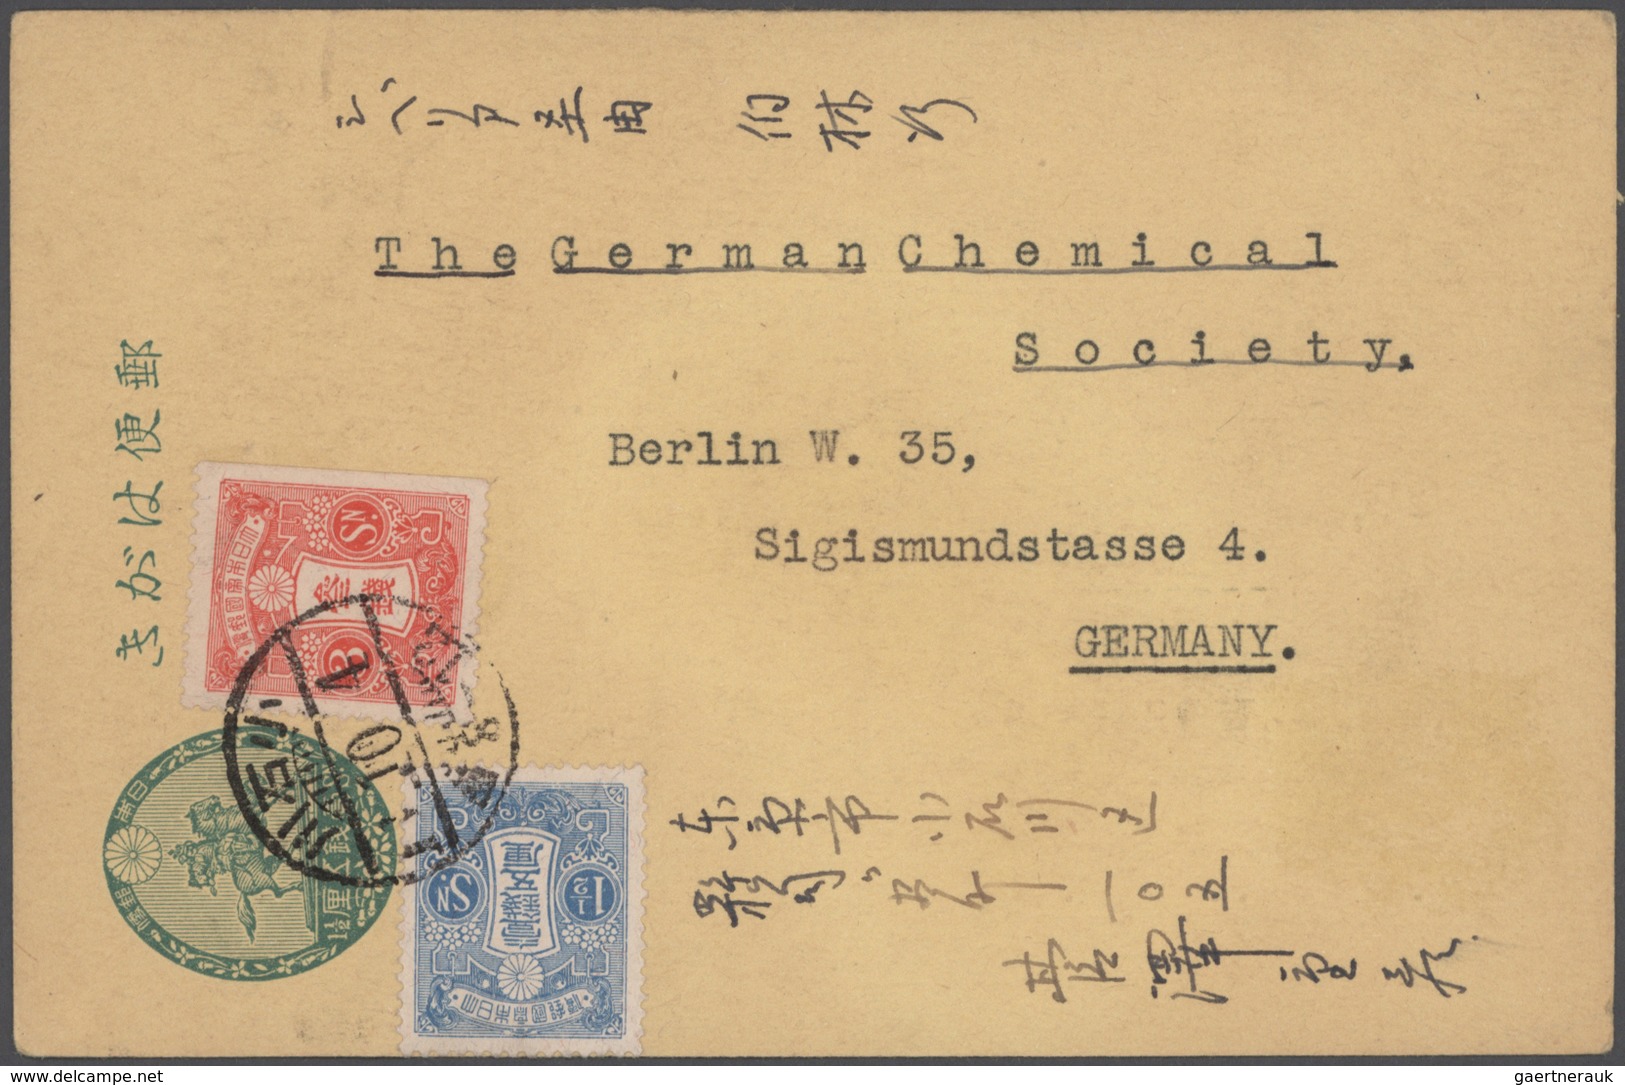 Japan: 1874/1983 (ca.), covers/used ppc (21 inc. one front) or used stationery (ca. 81). Total 102 i